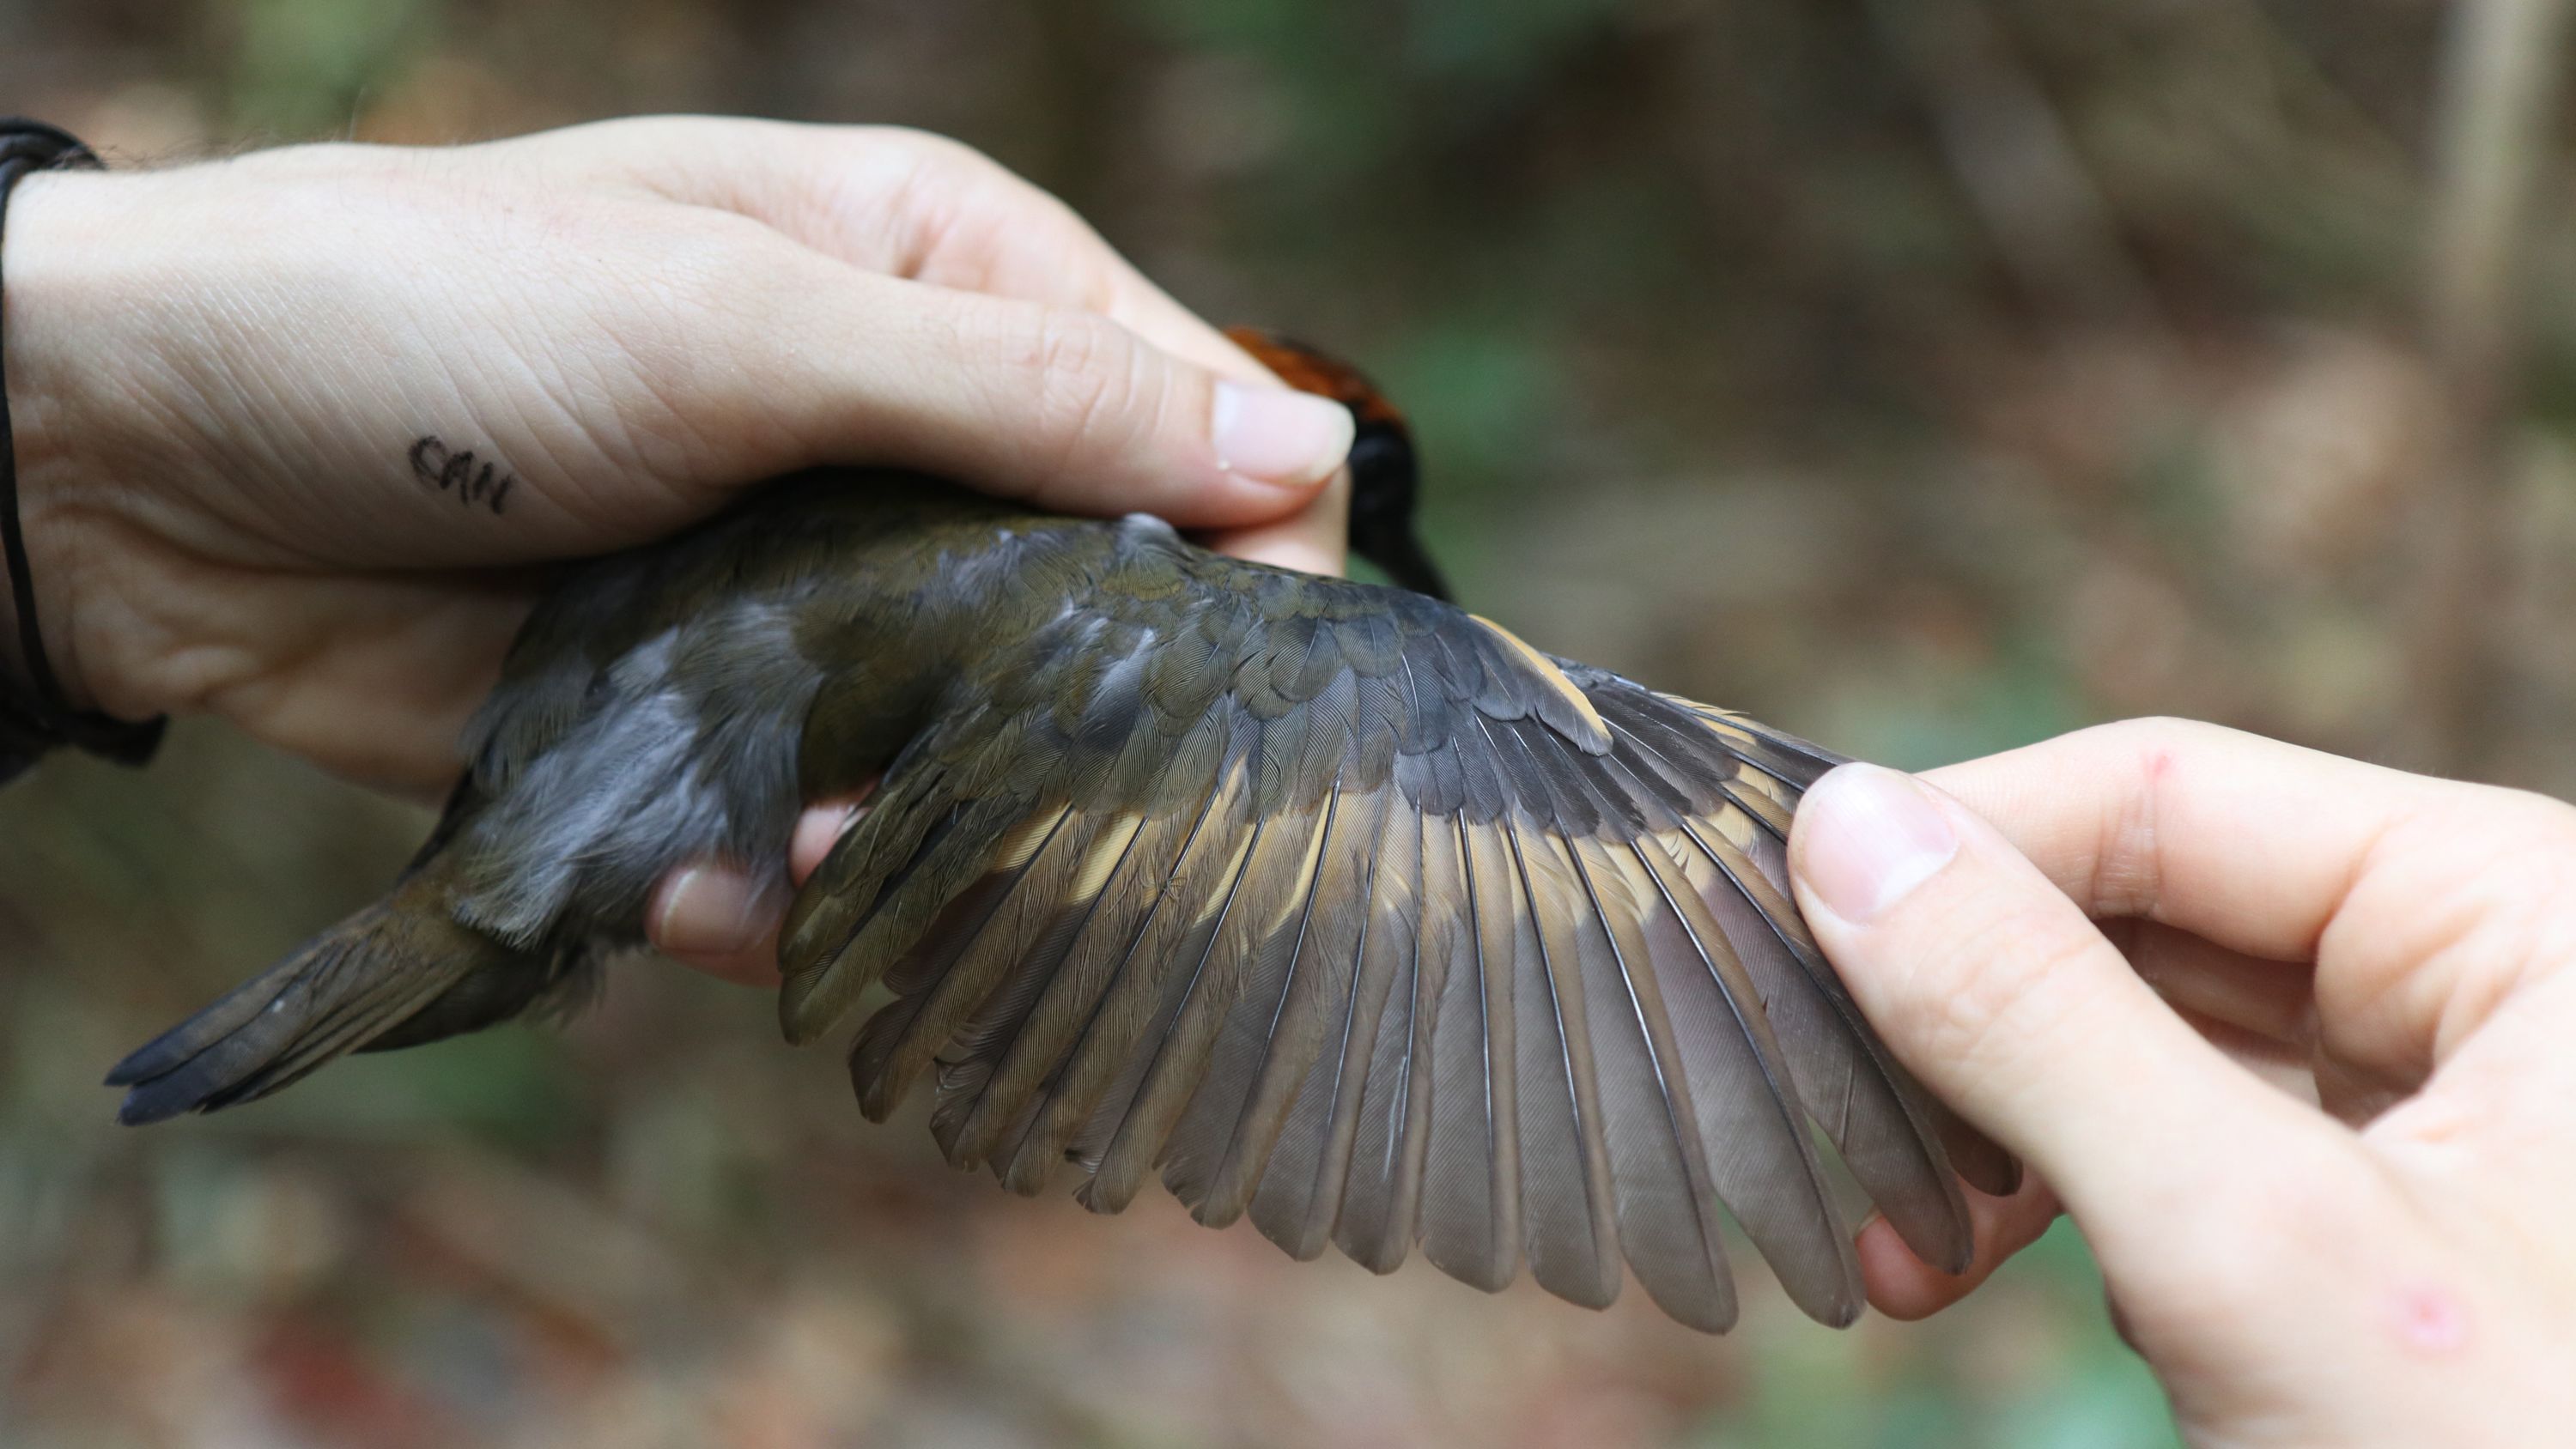 Birds in the Amazon rainforest developed increasing wing length, scientists found. Shown is the wing of a rufous-capped antthrush.